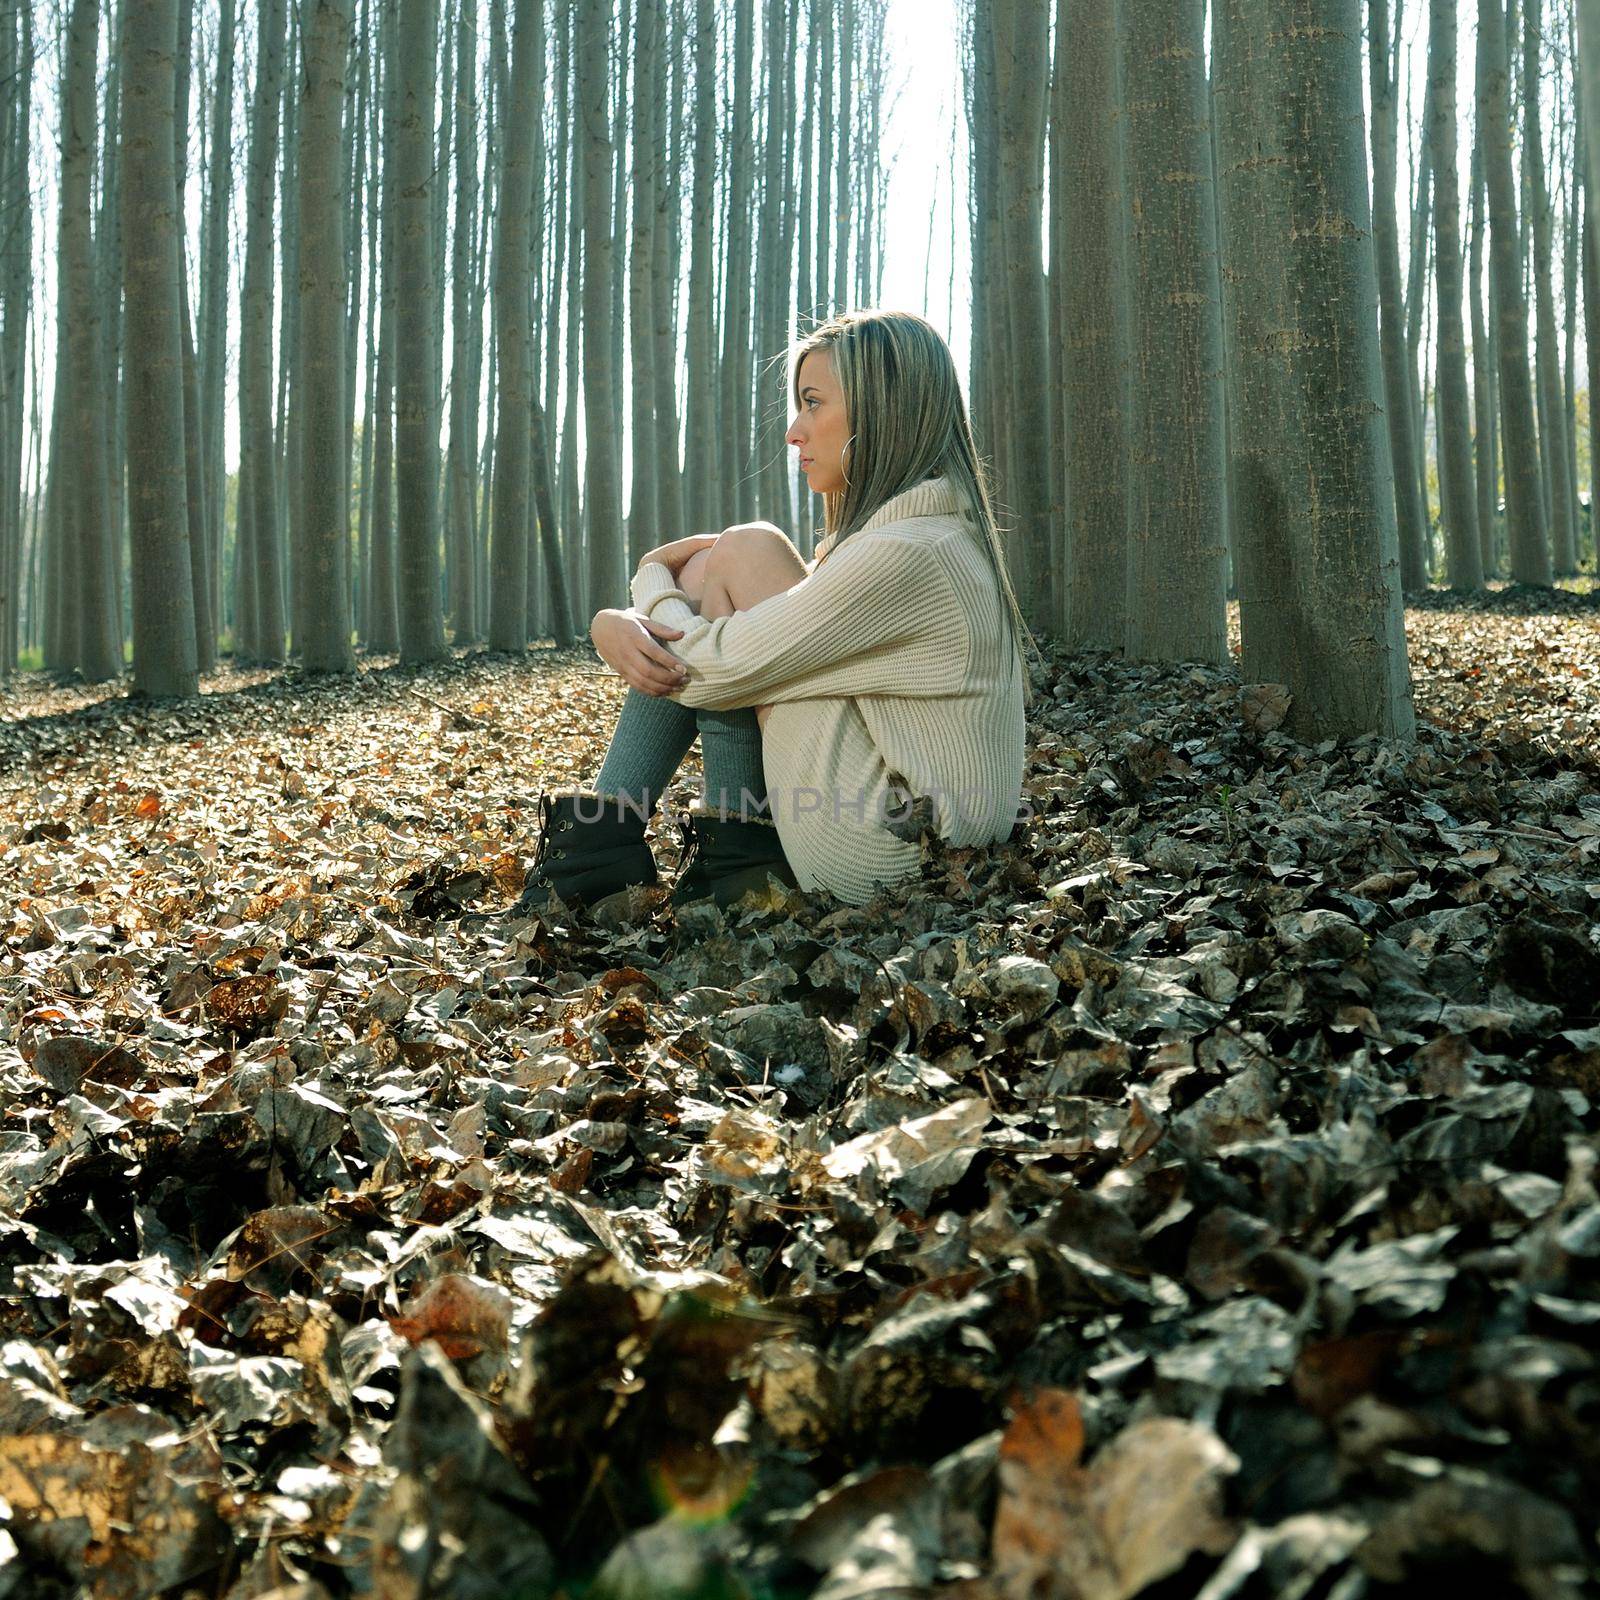 Beautiful blonde sitting on leaves in a forest of poplars